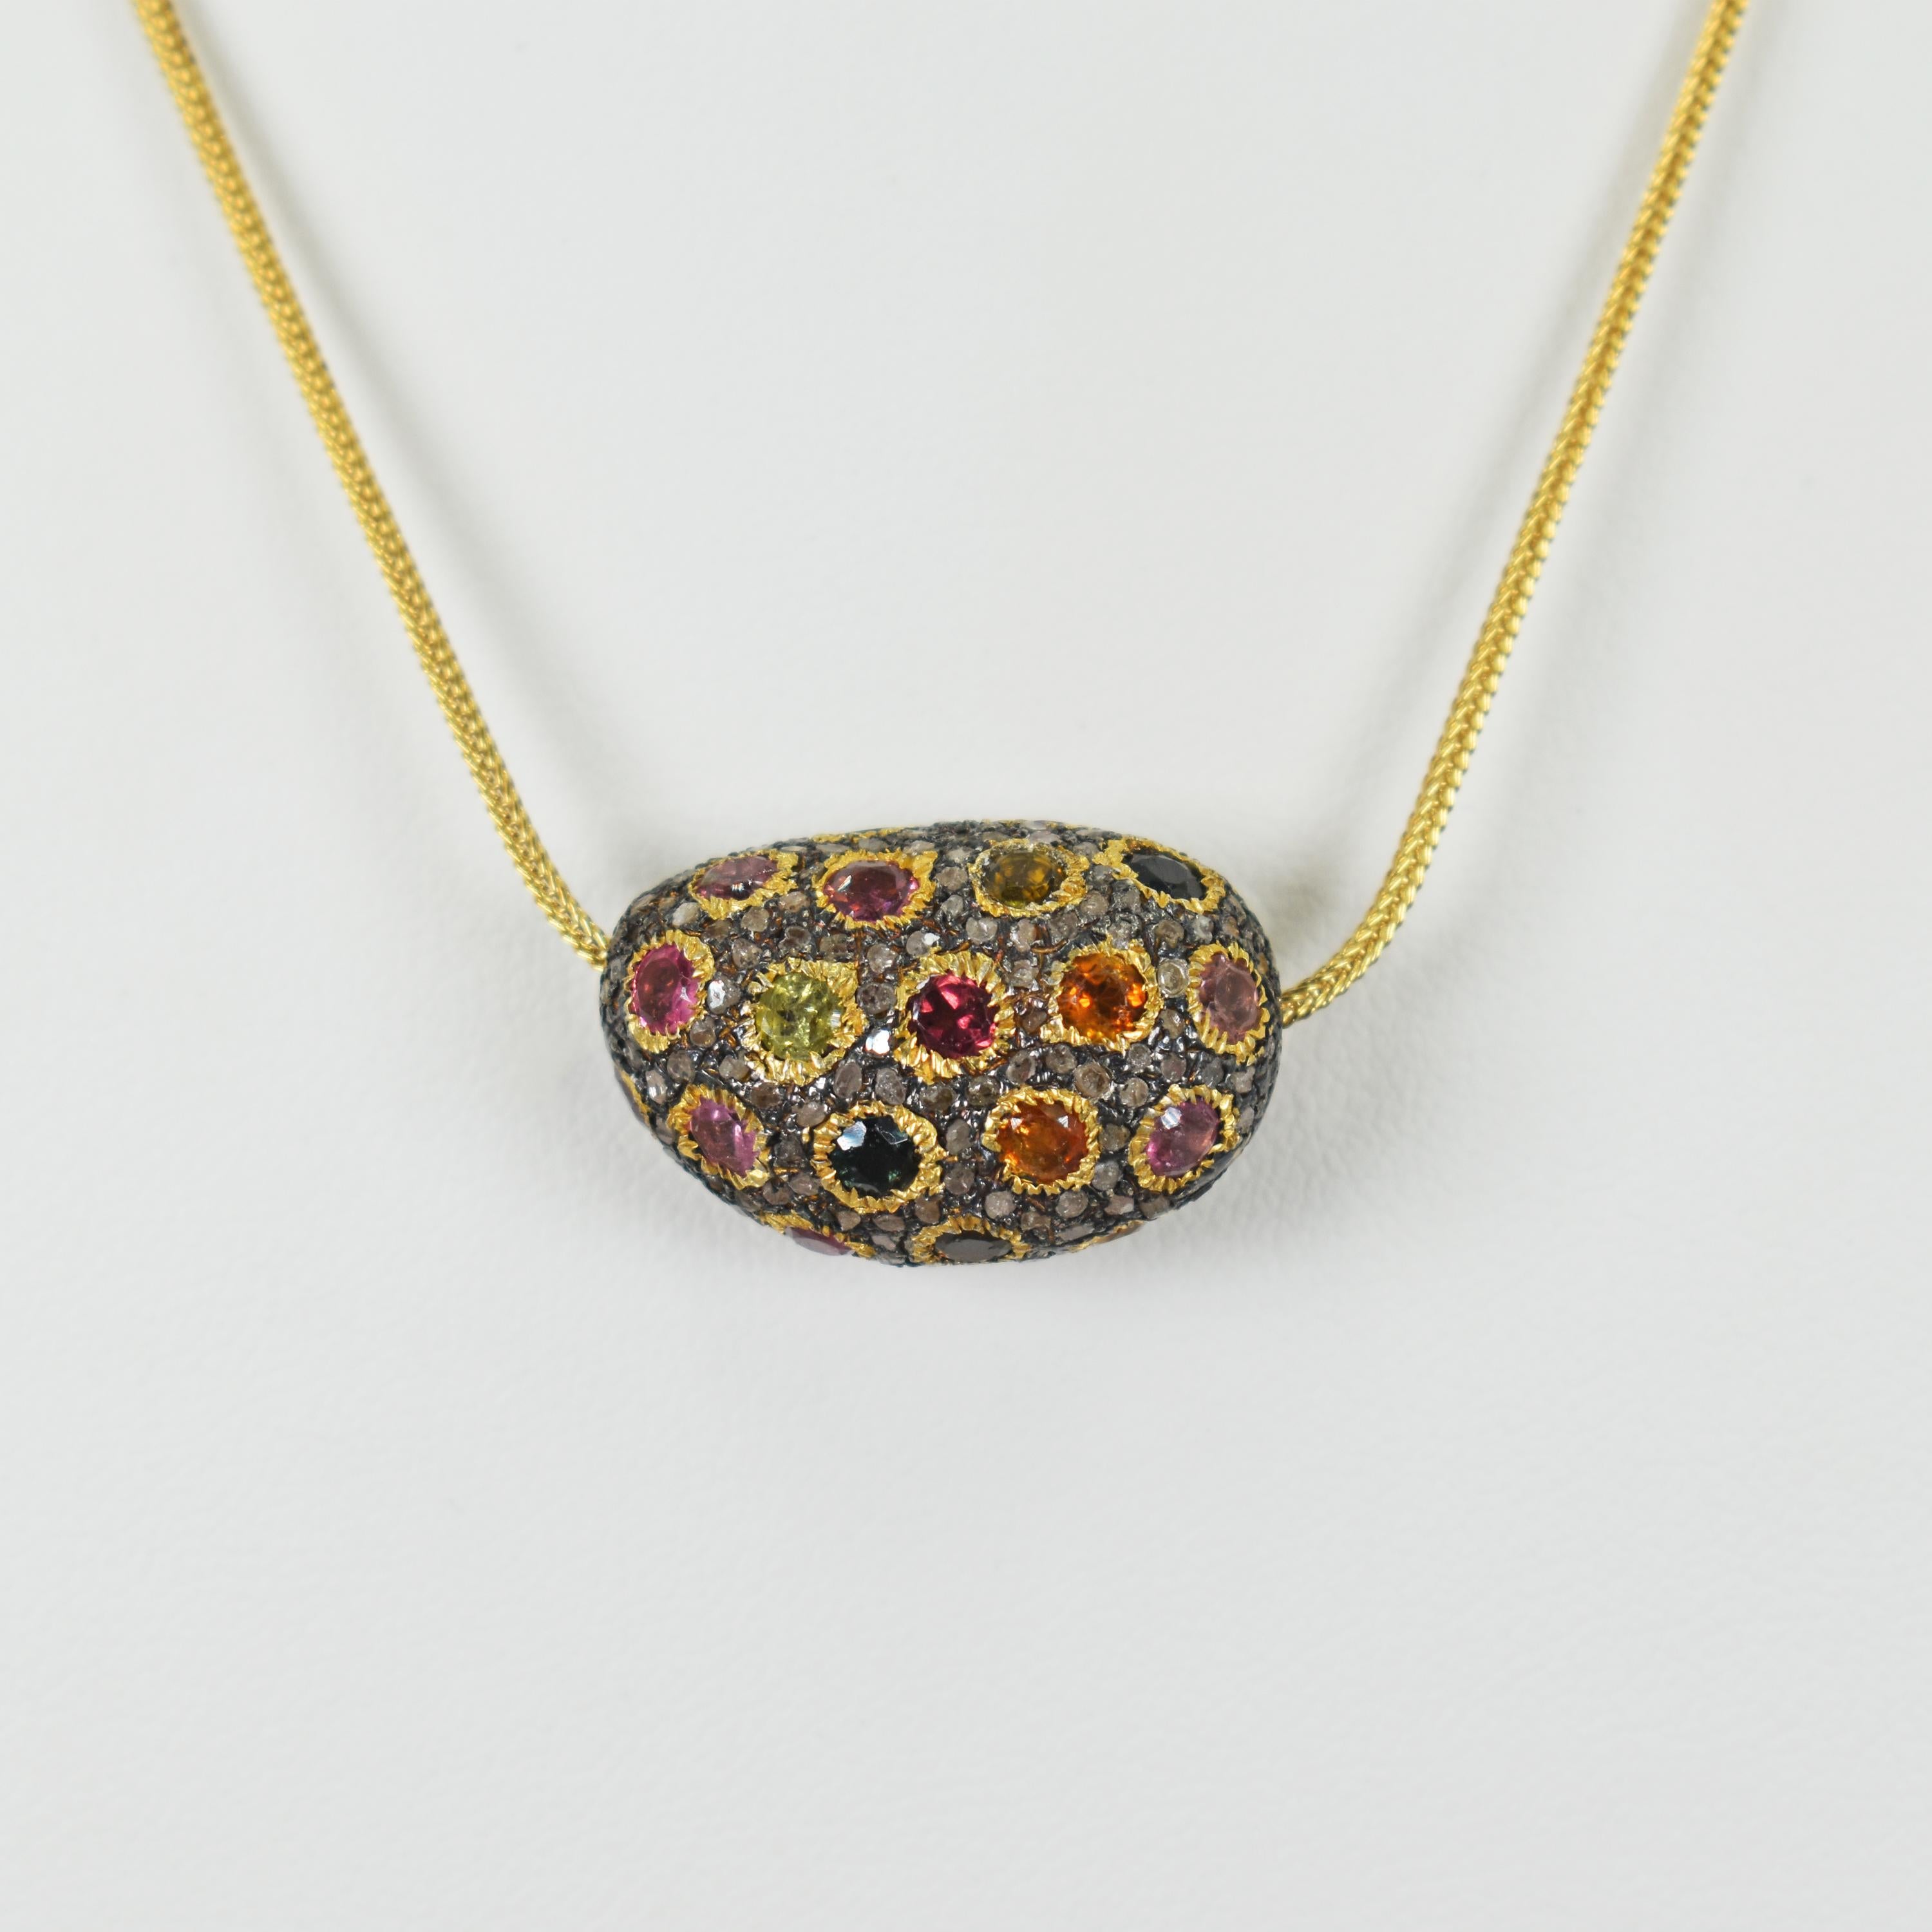 A rainbow spectrum of round faceted Green, Orange, Pink, Indicolite Blue, Yellow and Rubellite Tourmaline with accent grey pavè Diamonds set in an oxidized sterling silver and 18k yellow gold pebble shaped bead pendant necklace. There are